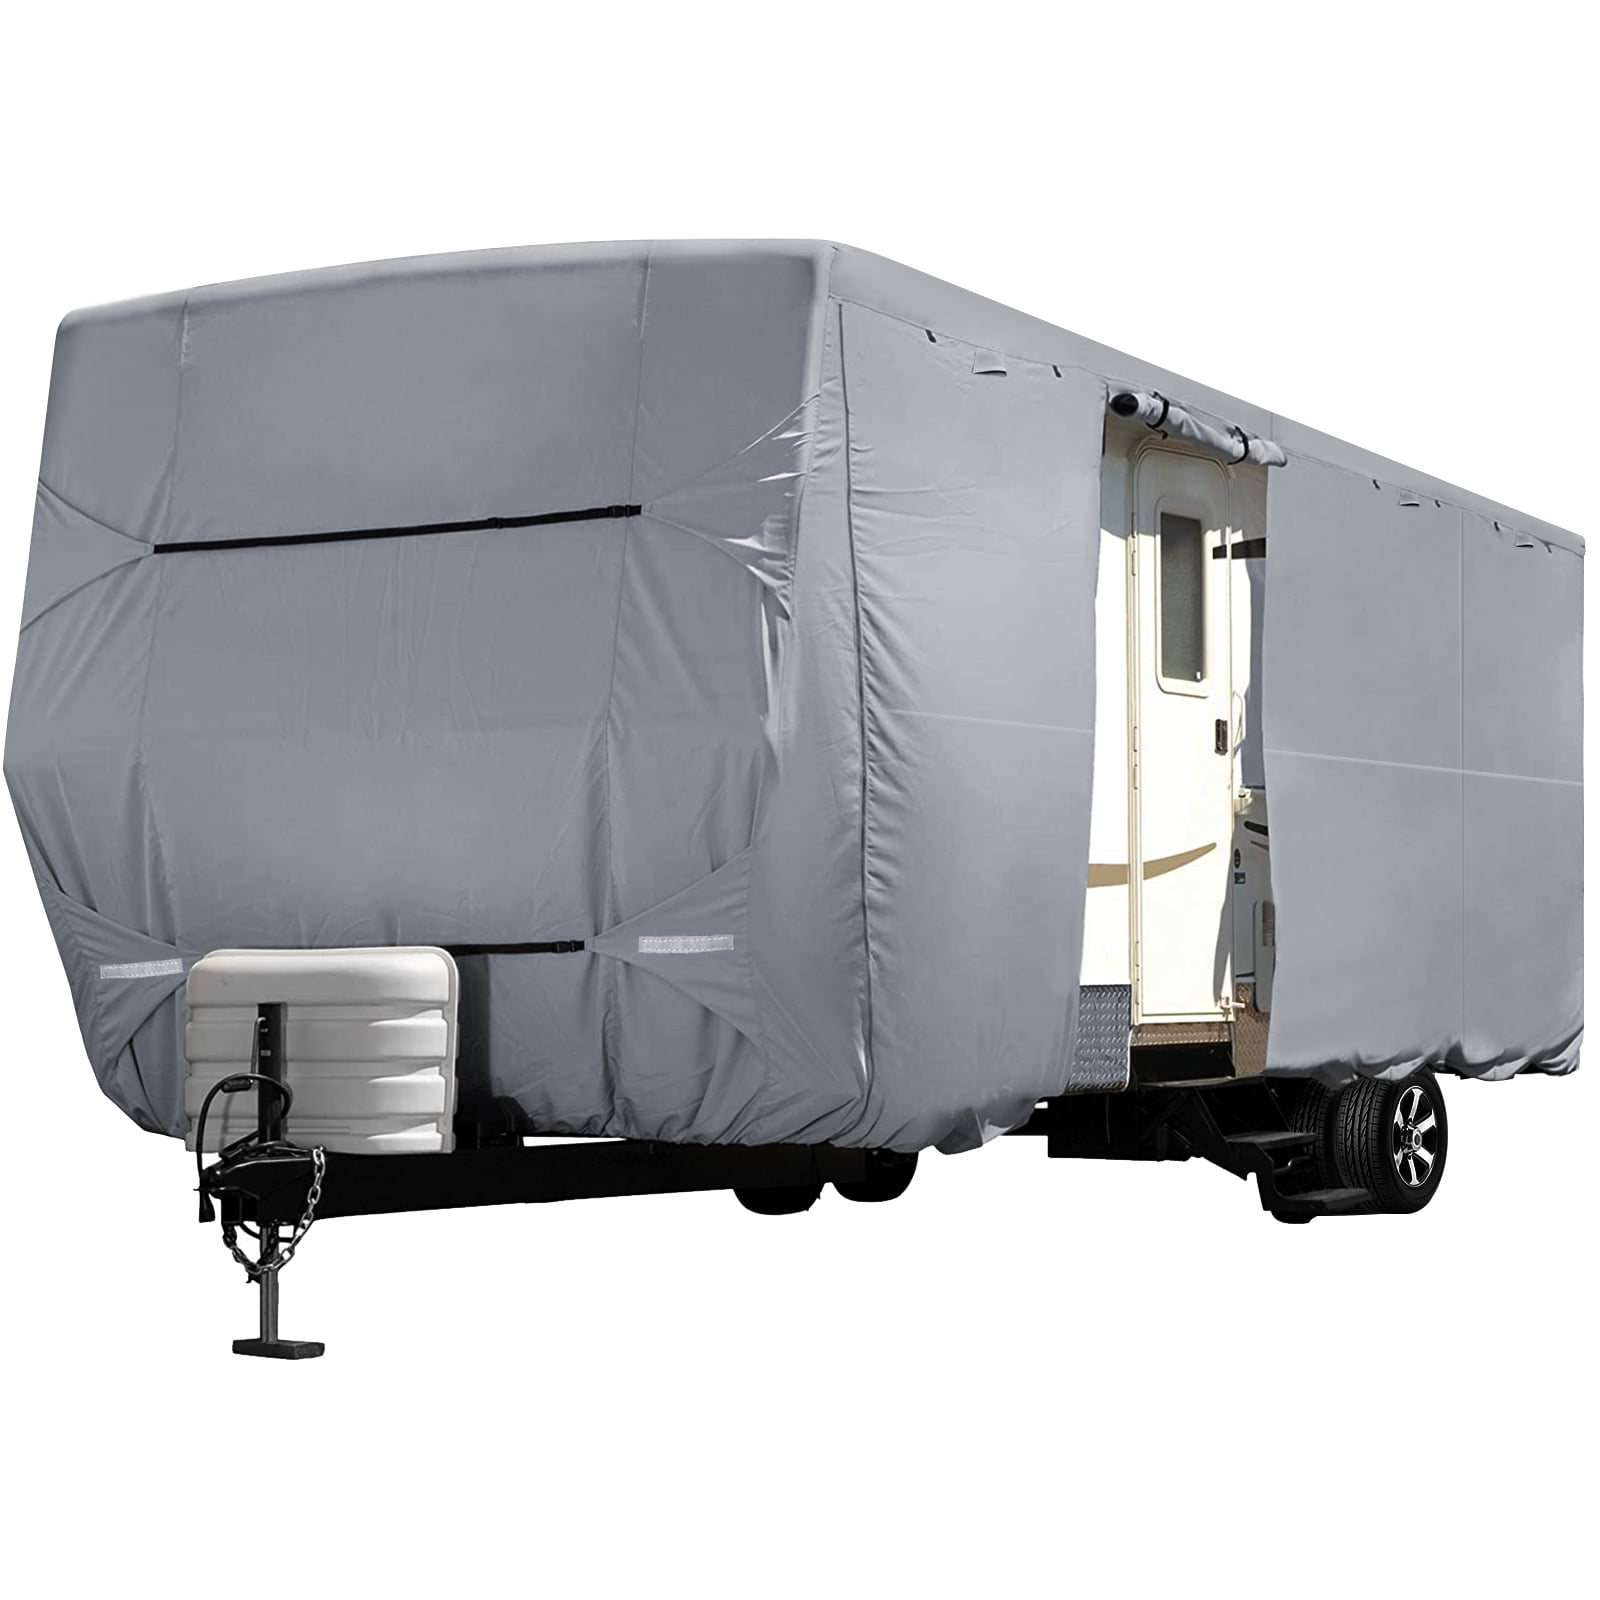 Upgraded Class A RV Cover Oxford Fabric Anti-Aging Waterproof Durable Design Fits 30’ 33’ Camper Motorhome with Various Accessories 